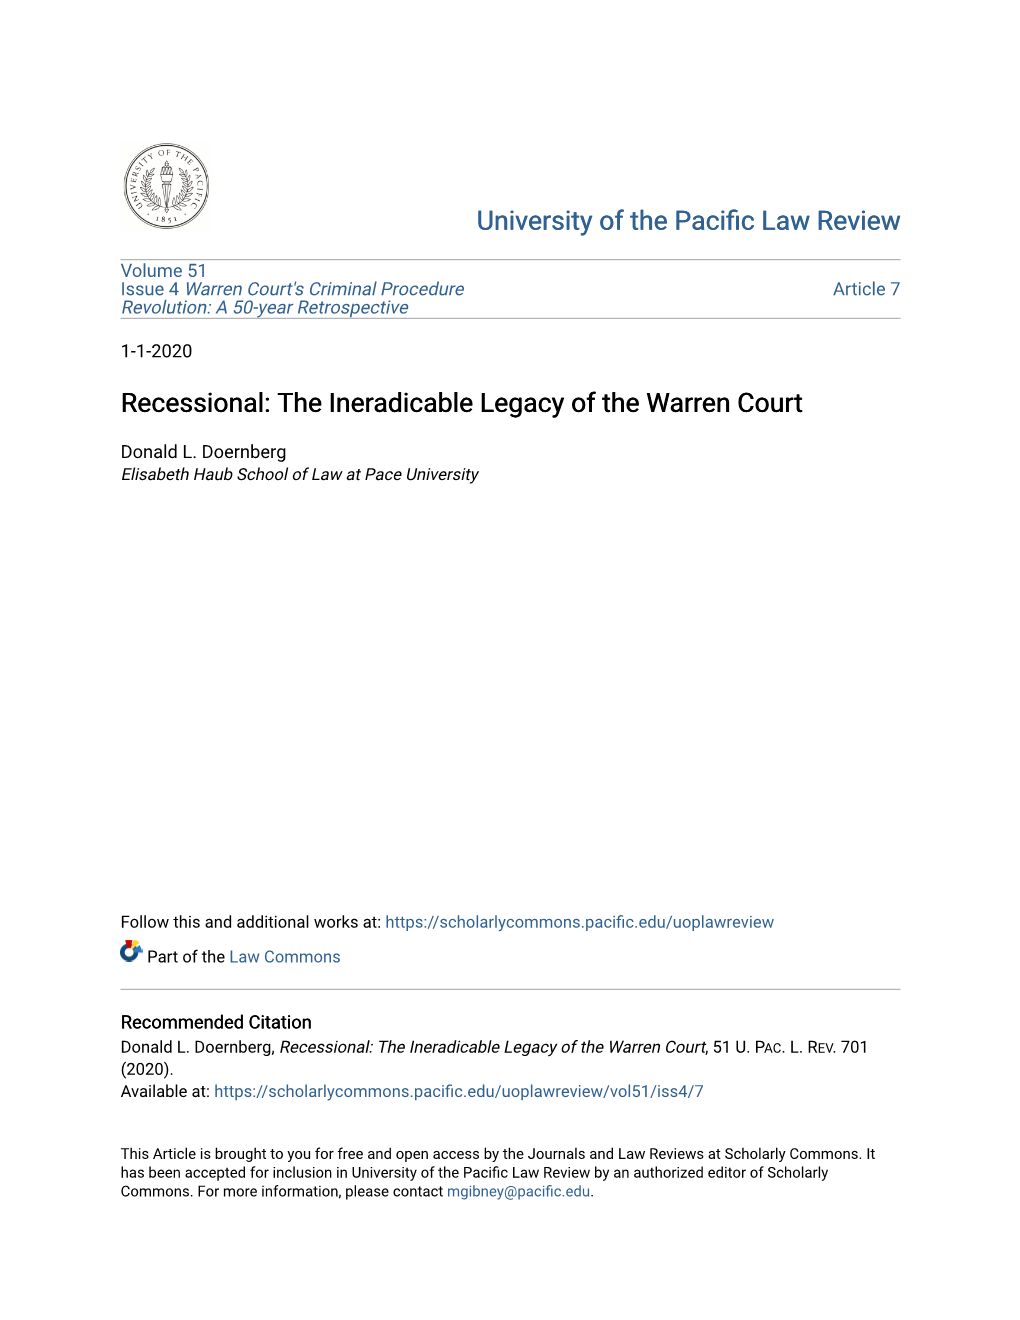 Recessional: the Ineradicable Legacy of the Warren Court